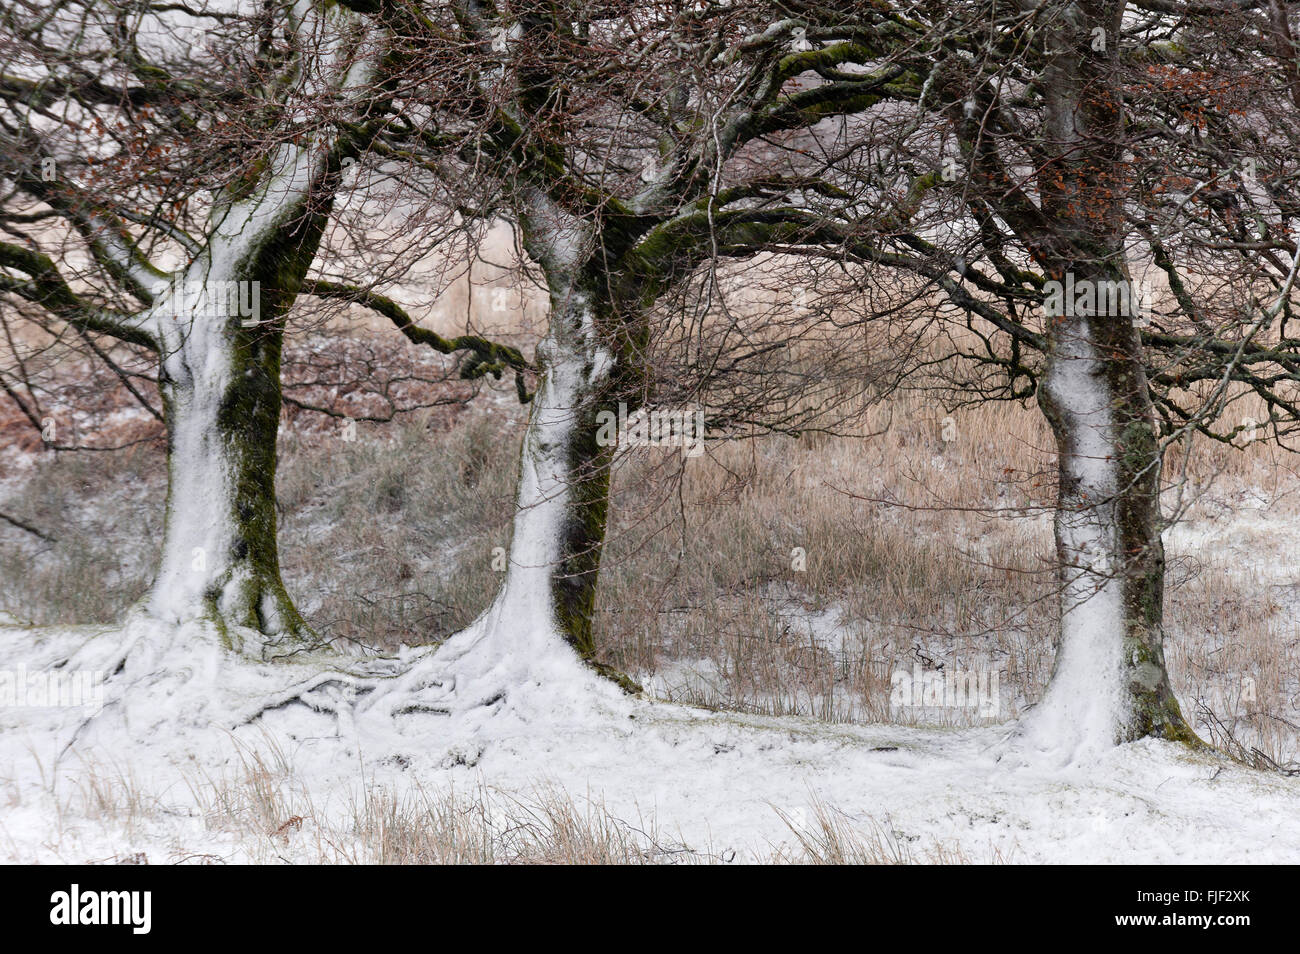 Upper Chapel, Powys, Wales, UK. 2nd March 2016. UK Weather: Trees are seen blasted with snow and ice during a blizzard between Upper Chapel & Garth, this morning on the high moorland of the Mynydd Epynt range. A blizzard of snow, hail, and sleet with winds gusting up to approximately 50mph hit high land in Powys, Wales this morning. Credit:  Graham M. Lawrence/Alamy Live News. Stock Photo